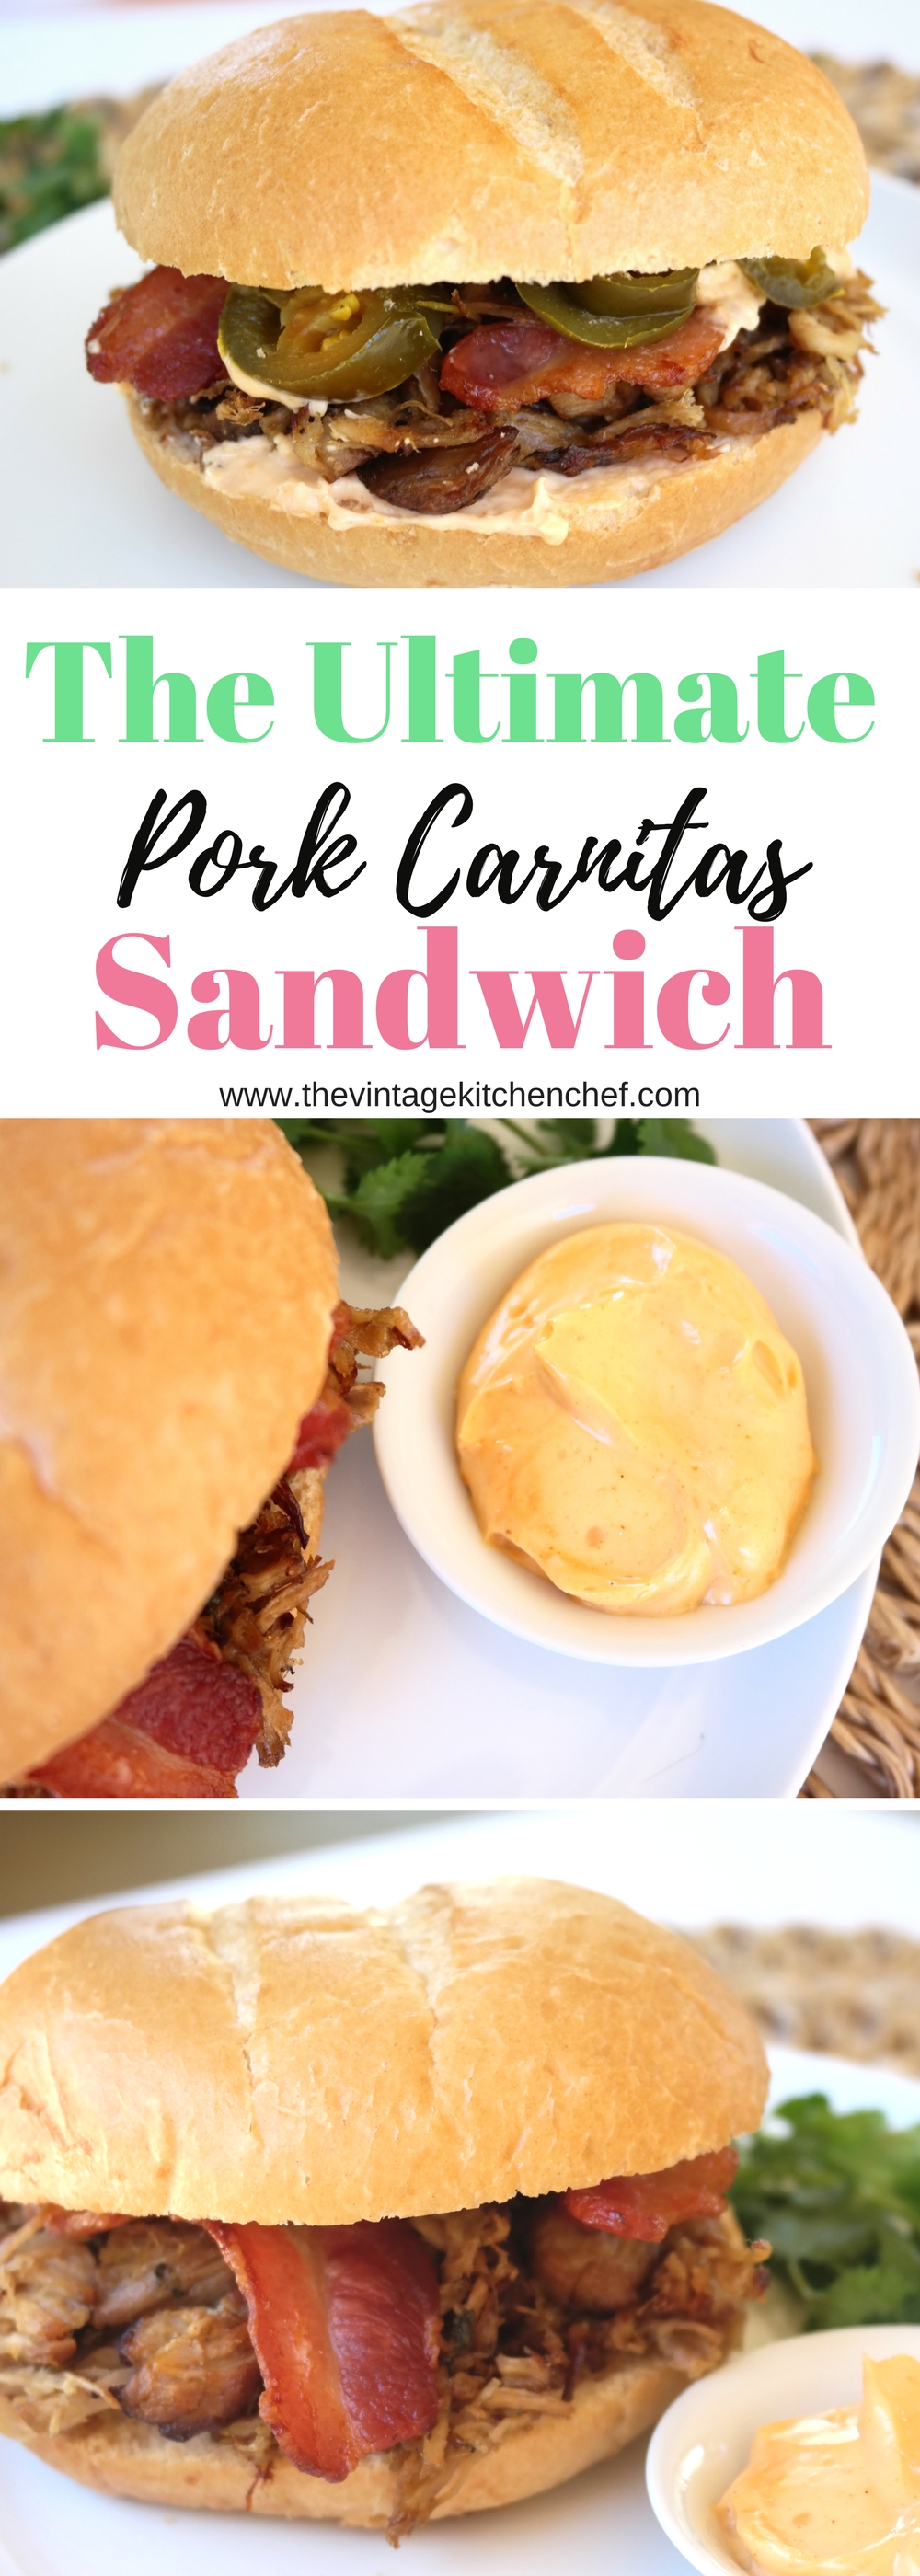 The Ultimate Pork Carnitas Sandwich is bursting with flavor and yummy goodness! If you're looking for a filling and fabulous sandwich, then look no further.